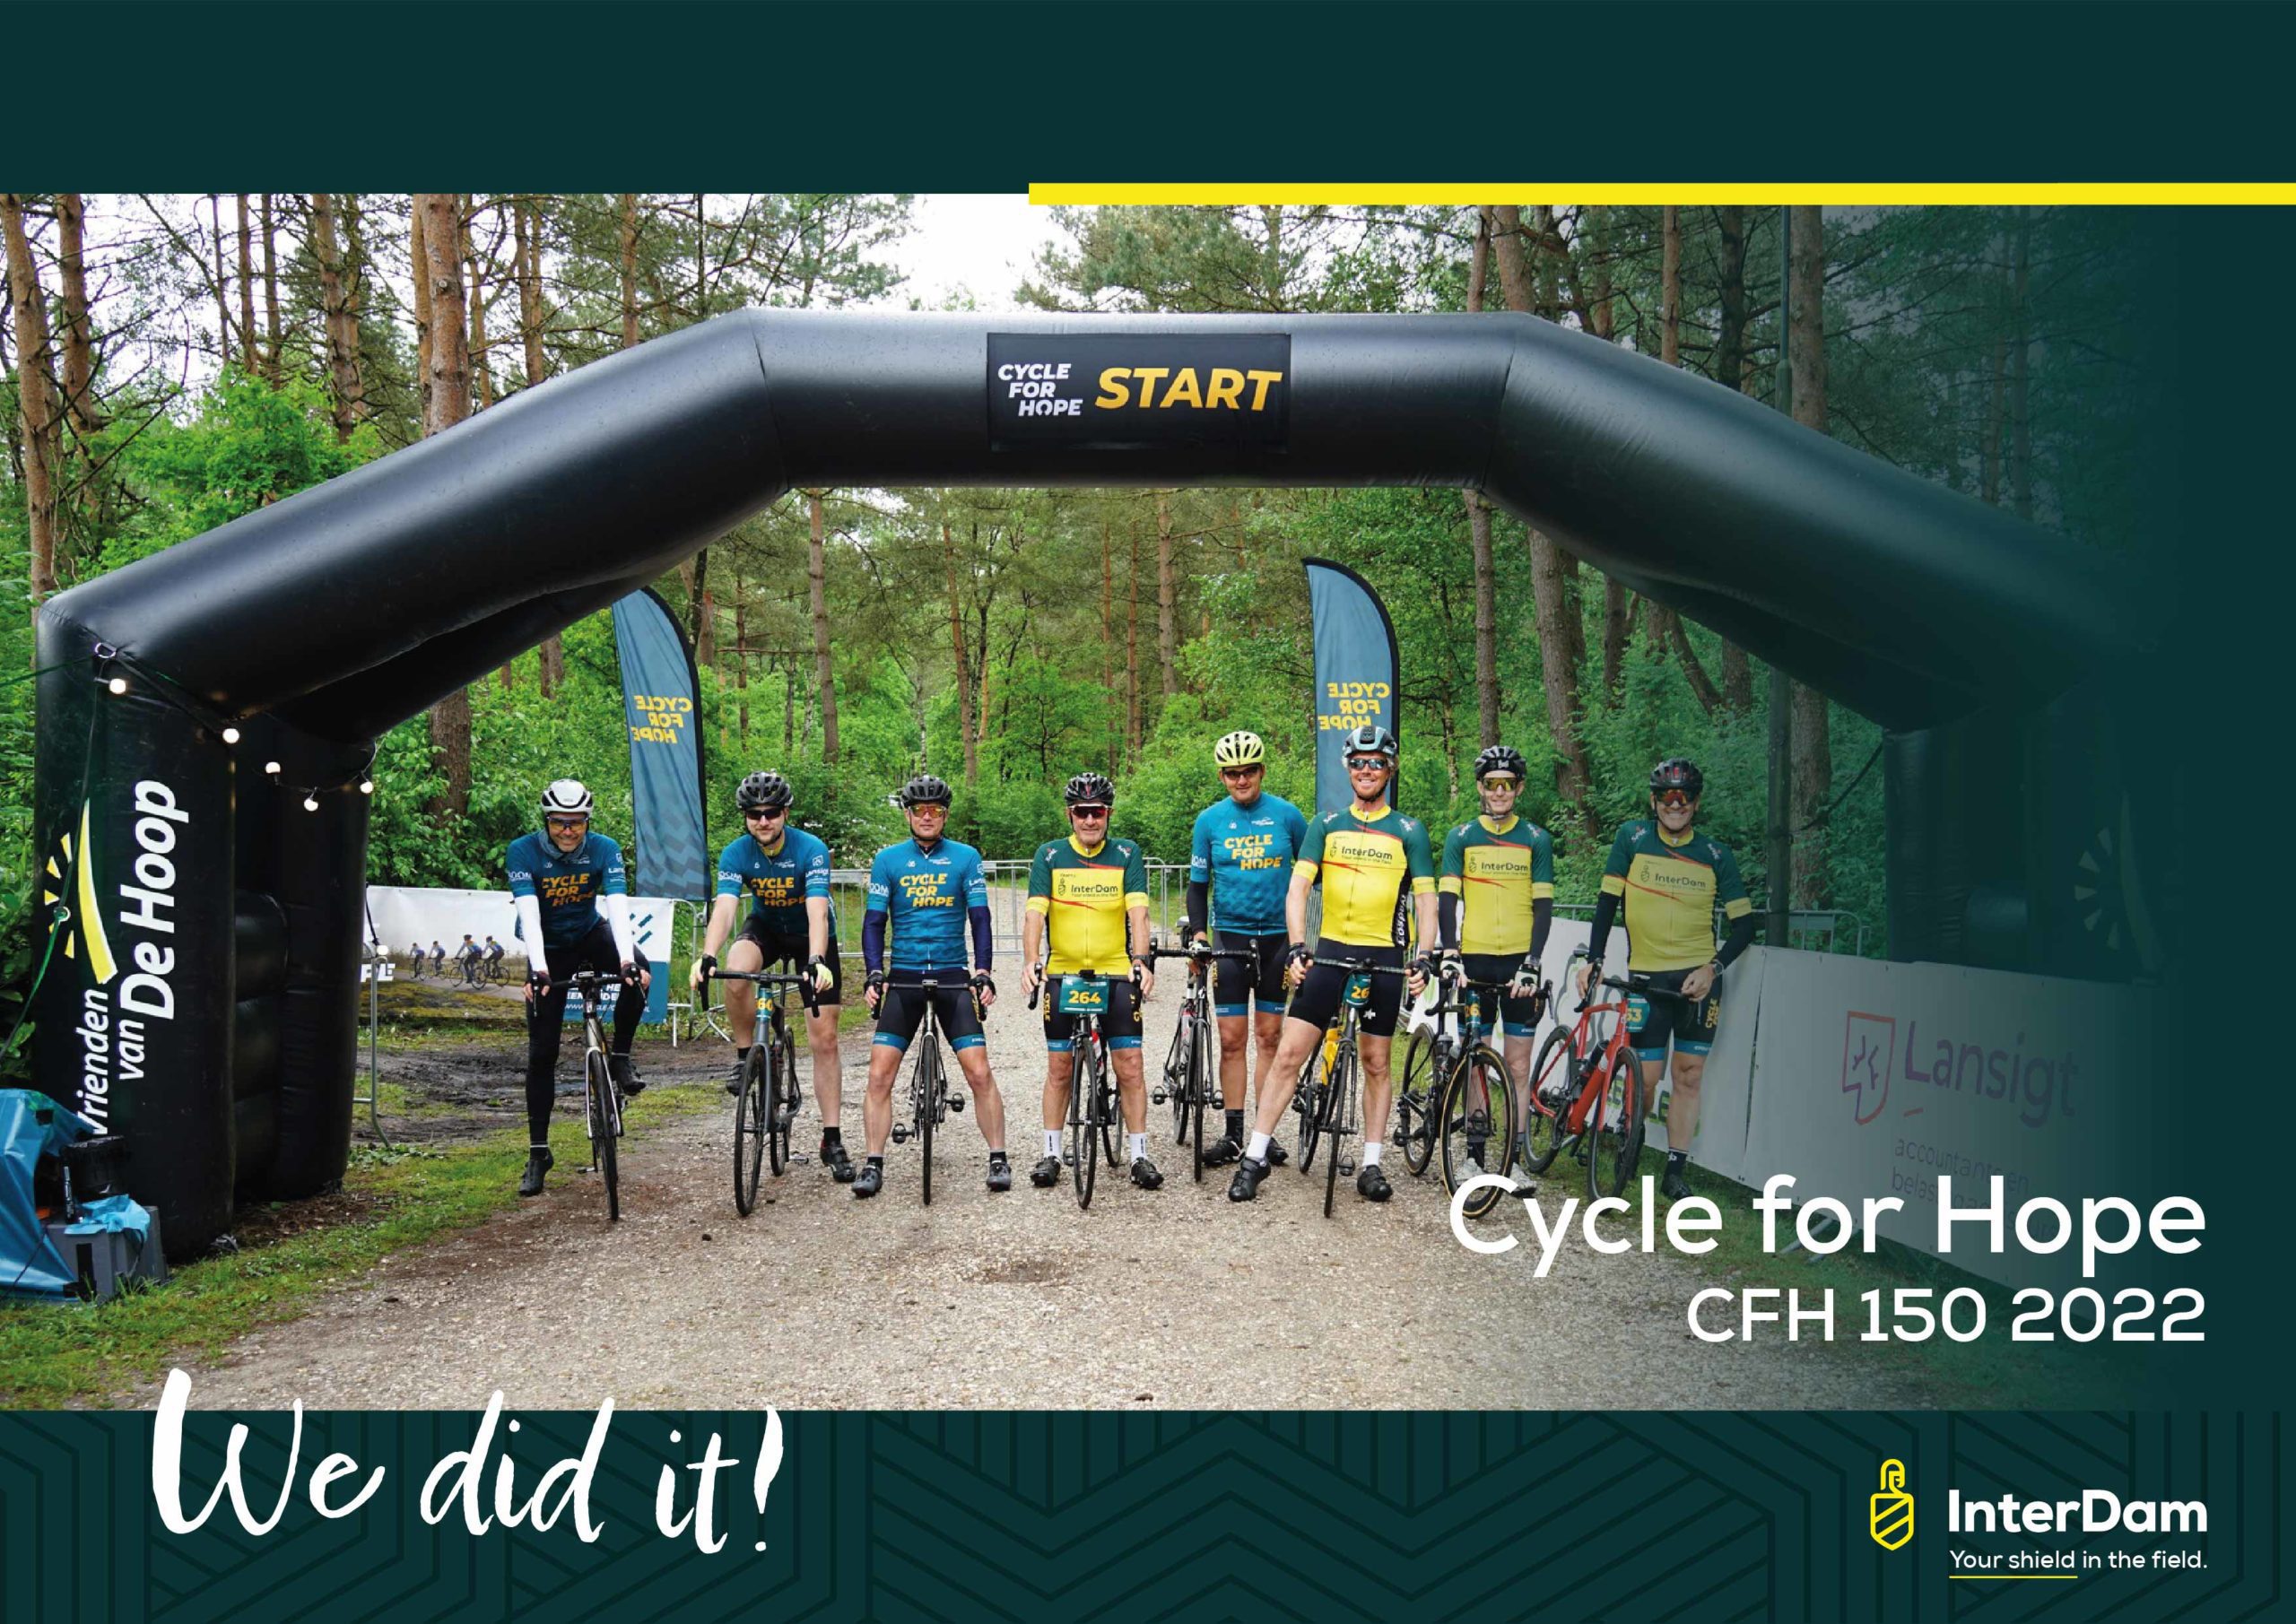 Cycle for Hope Charity Ride